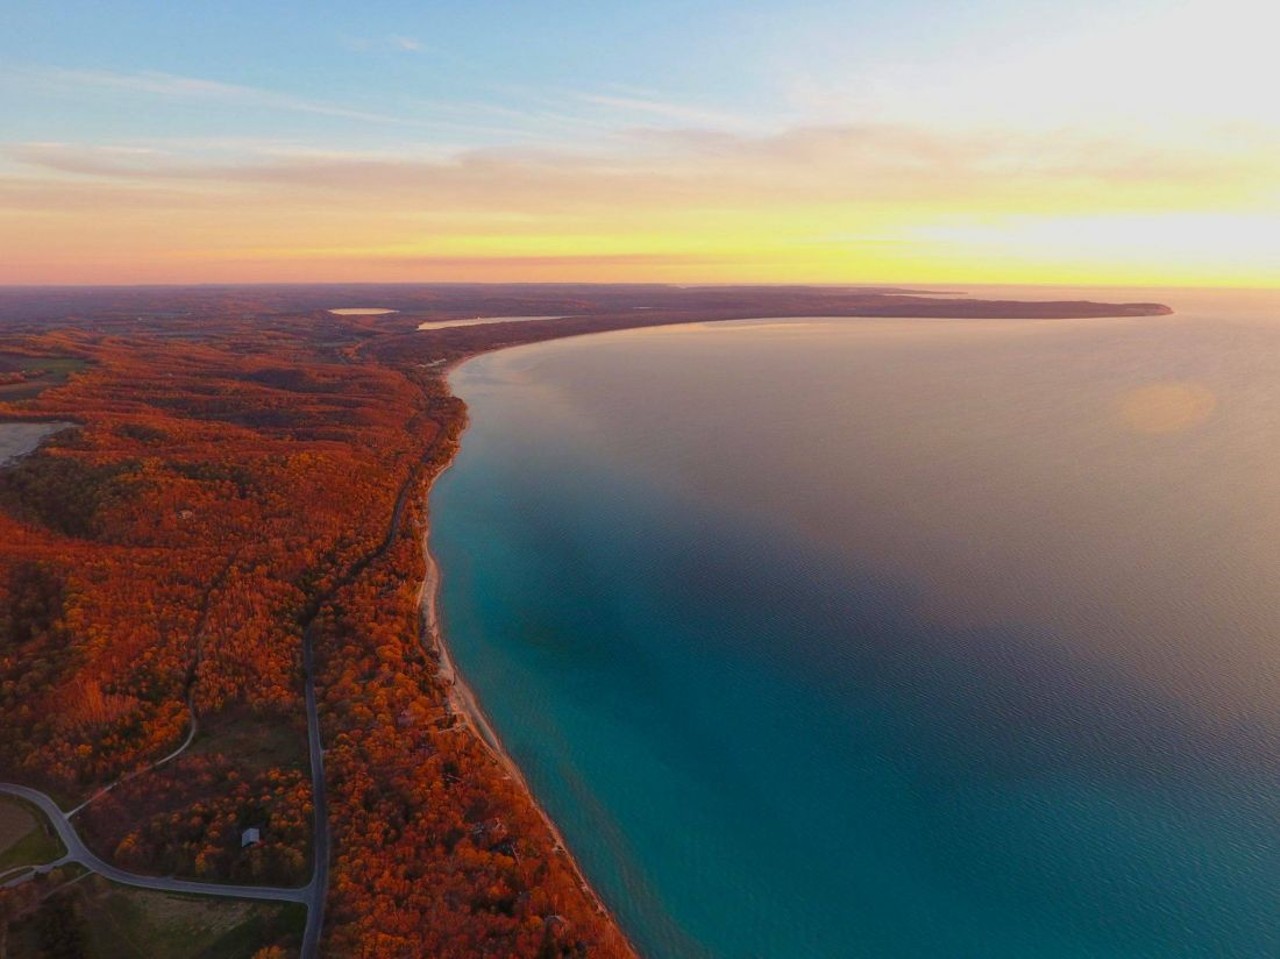 Leland
Leland is on a piece of land between Lake Michigan and Lake Leelanau. It&#146;s a lovely place to walk around and visit the shops, museums, and galleries while taking in all the beauty nature has to offer. Photo via Instagram user, Carriefilm